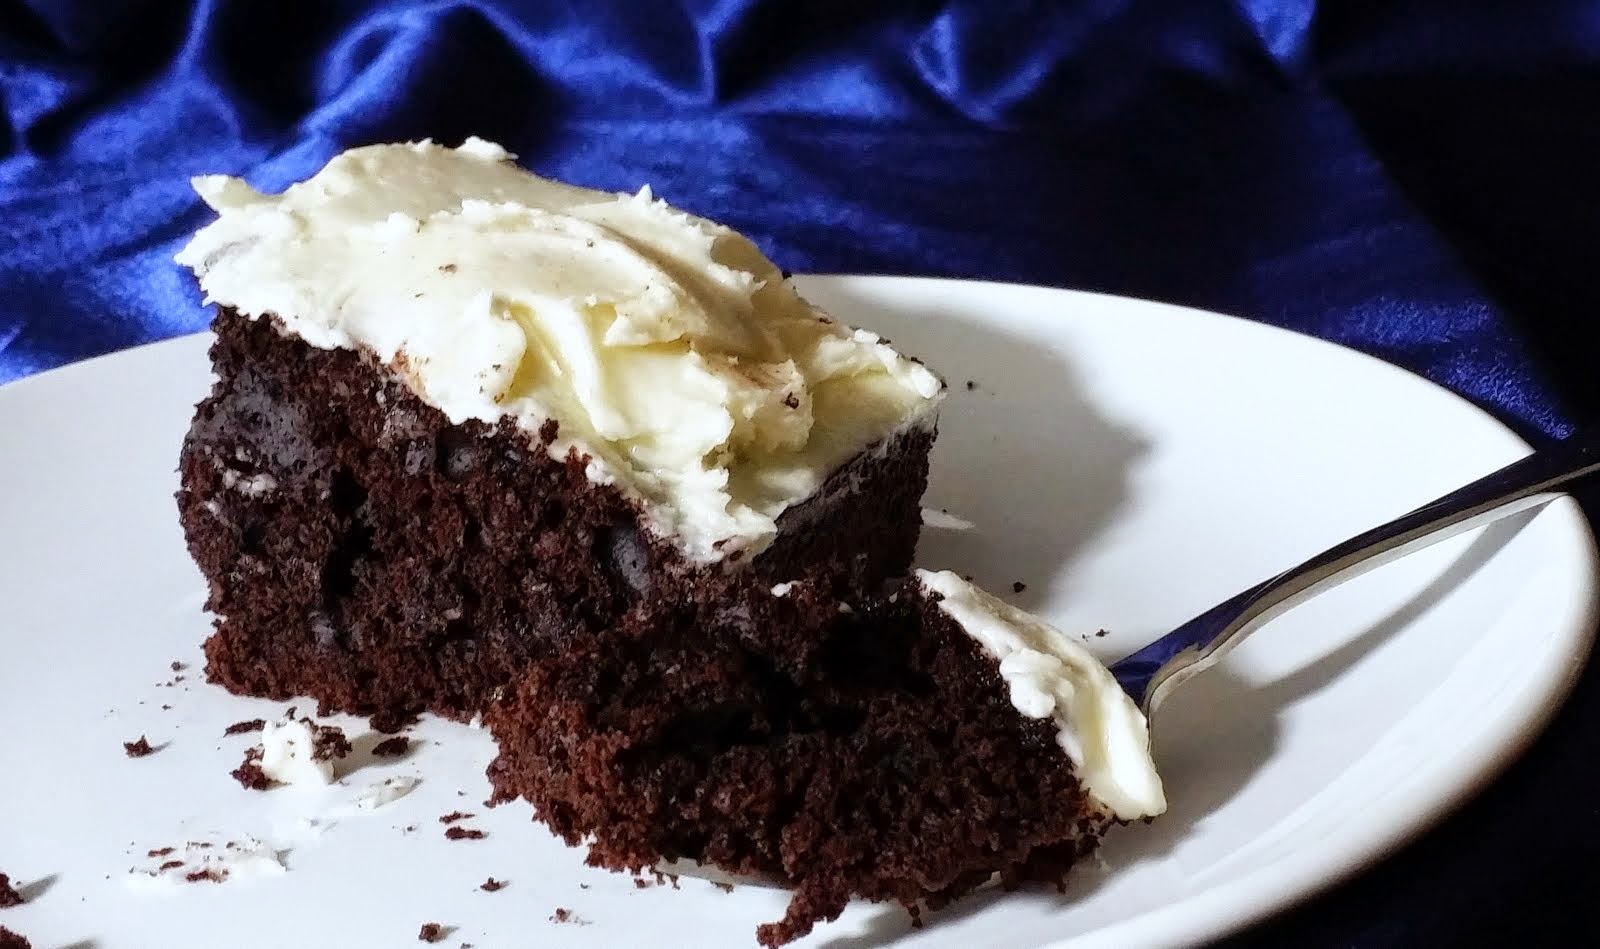 A Table At Robert Ridge: Devil’s Food Cake with Buttercream Frosting